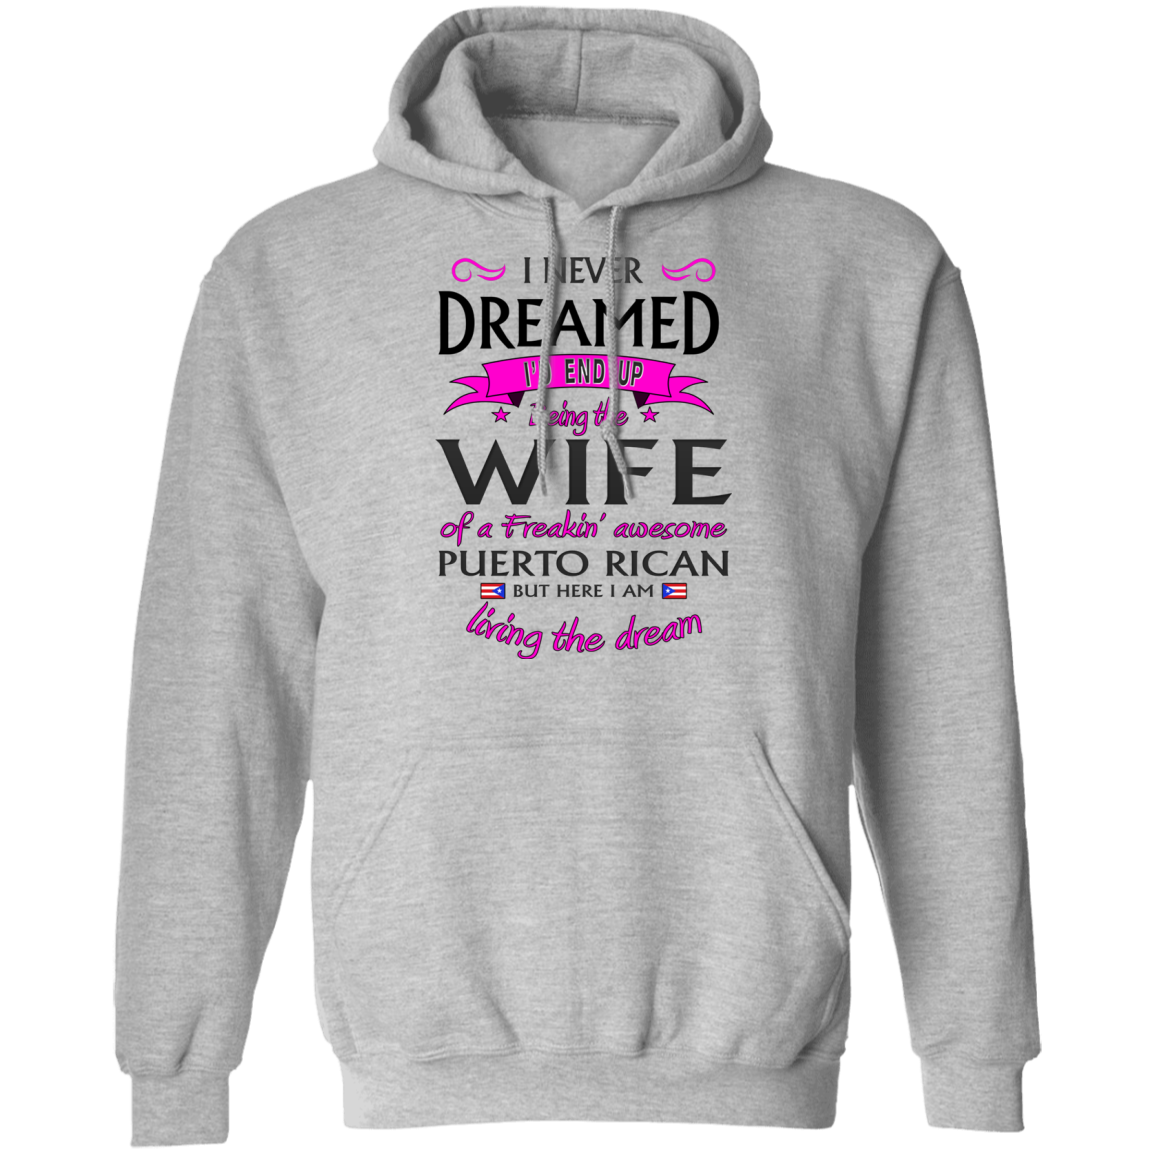 WIFE of Awesome PR Pullover Hoodie - Puerto Rican Pride